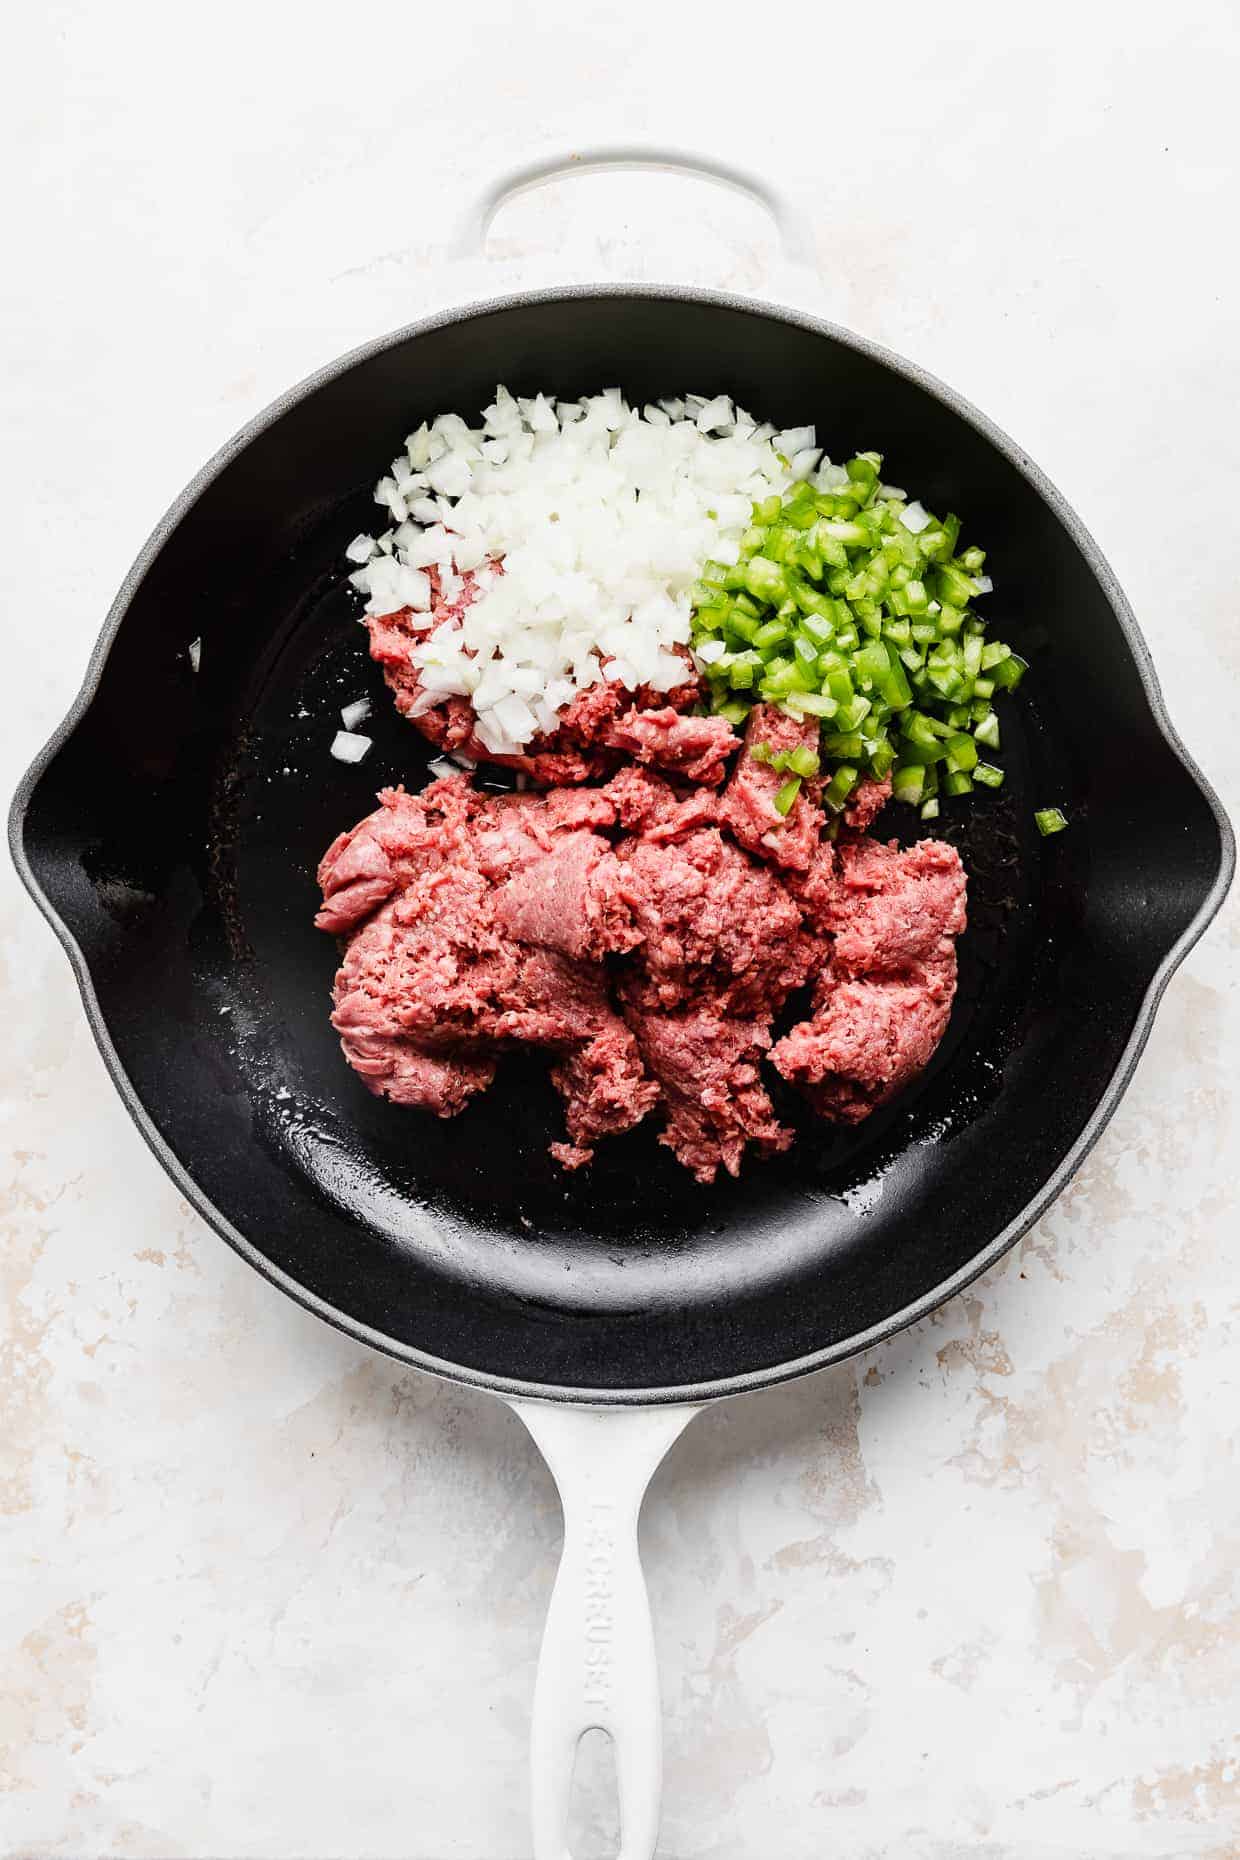 A skillet full of ingredients used to make homemade sloppy joes, against a white textured background. 